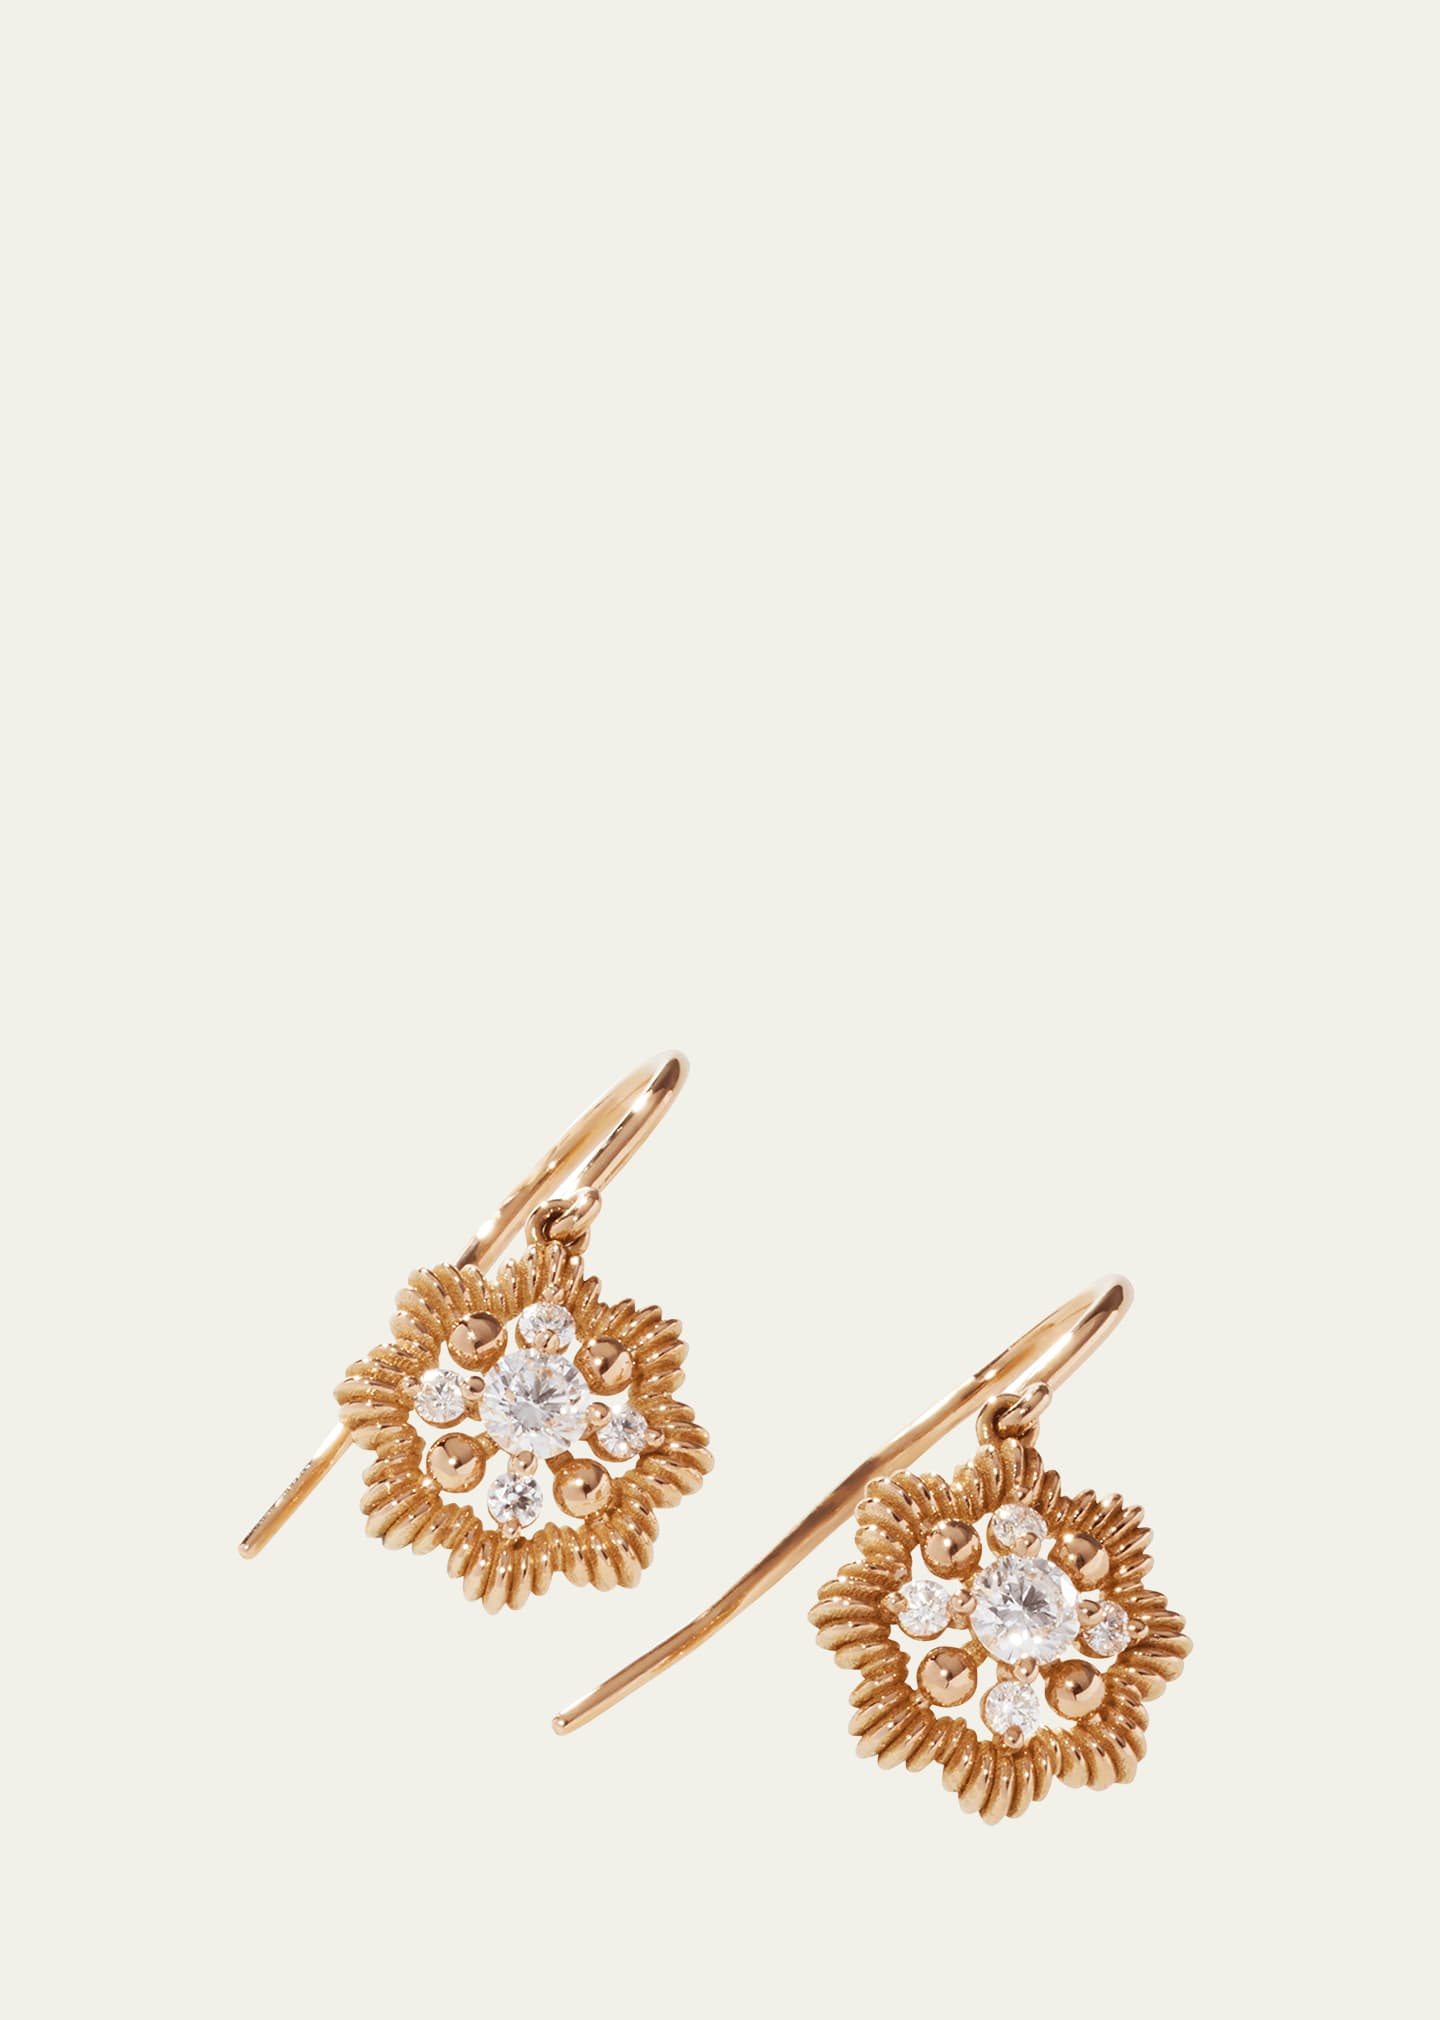 OSCAR MASSIN LACE FLOWER 18K RECYCLED YELLOW GOLD AND LAB GROWN DIAMOND DROP EARRINGS